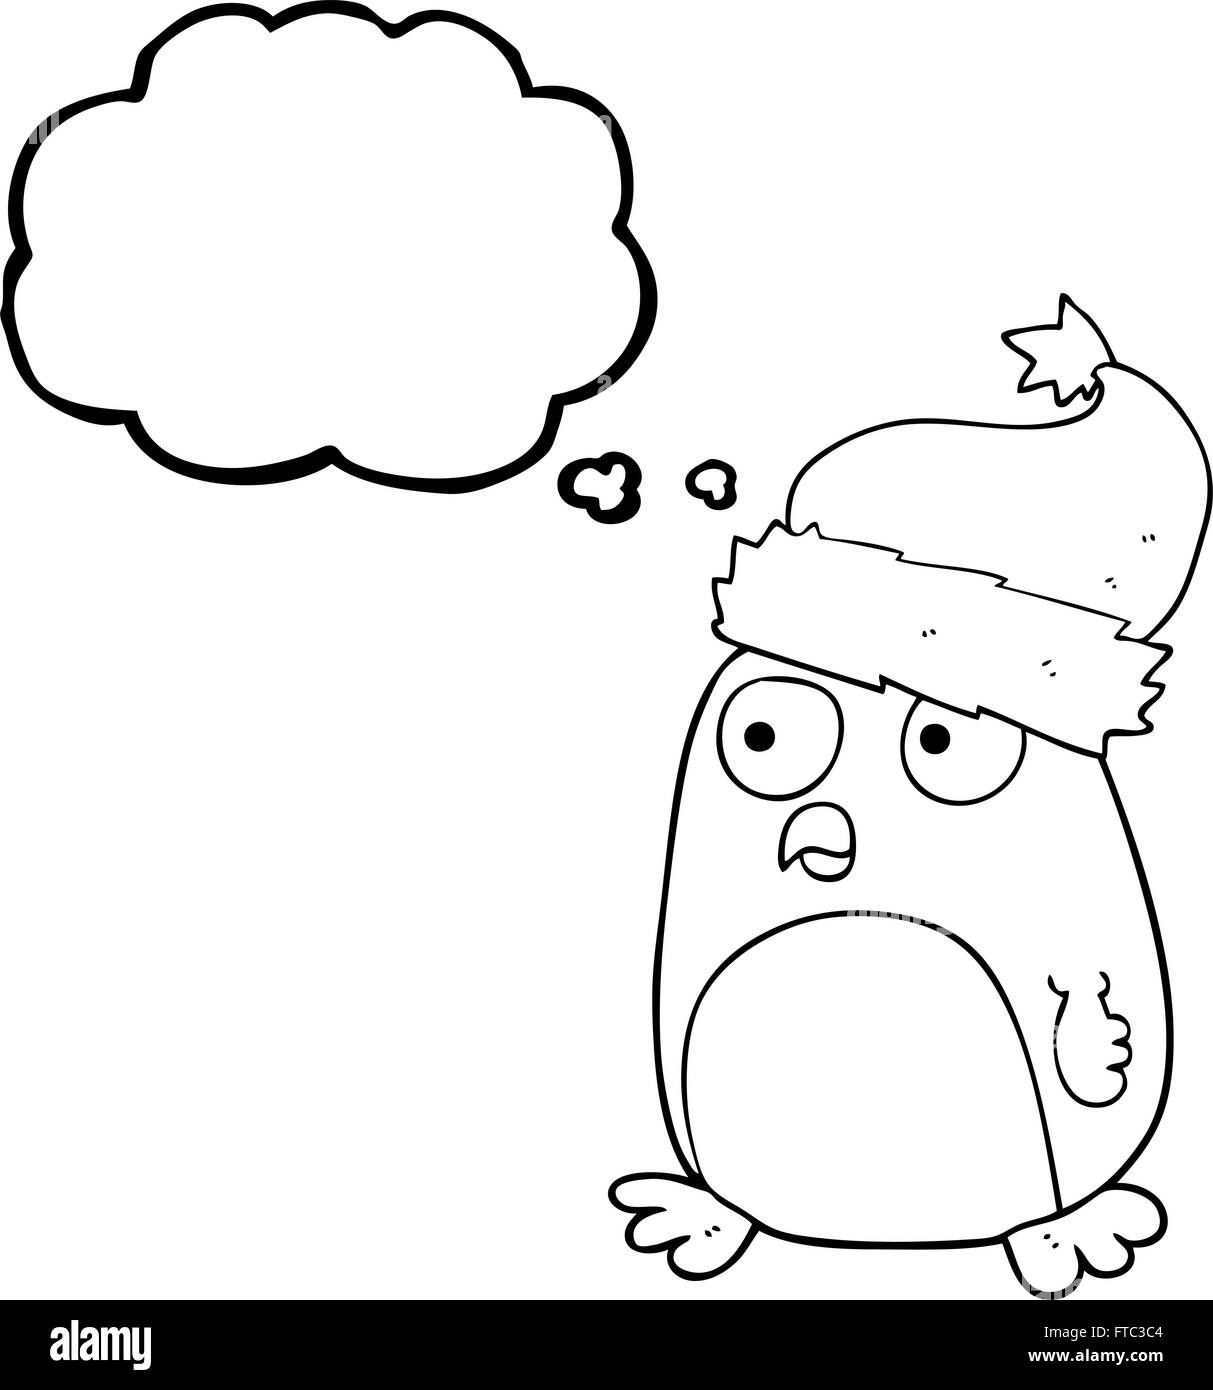 freehand drawn thought bubble cartoon penguin in christmas hat Stock Image